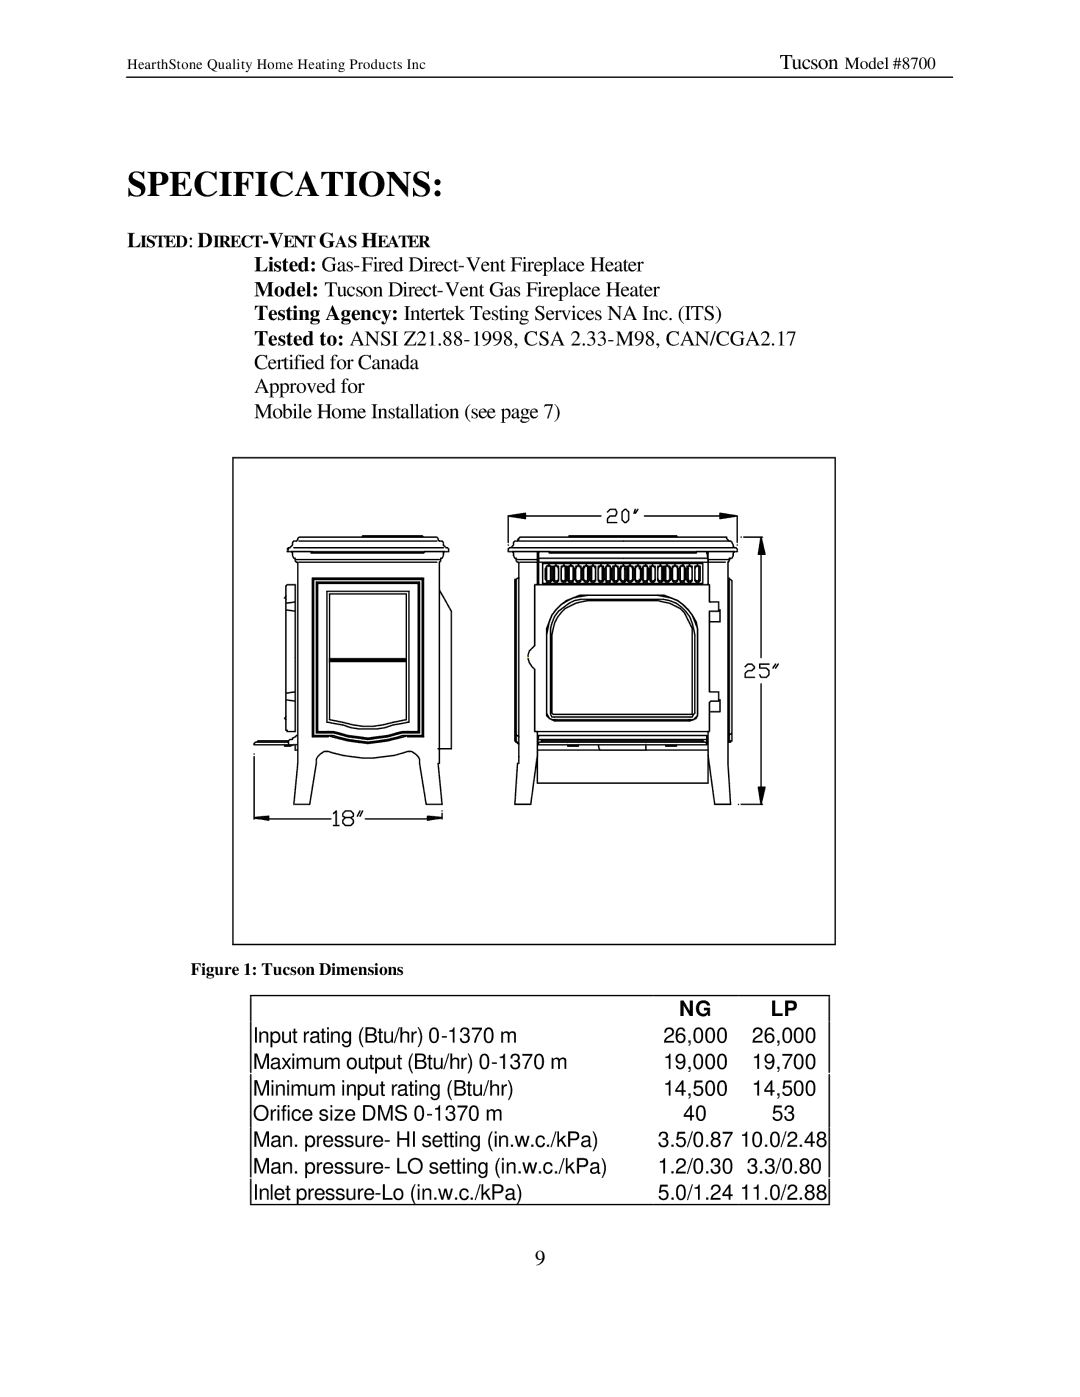 Hearth and Home Technologies Tucson (8700) owner manual Specifications 